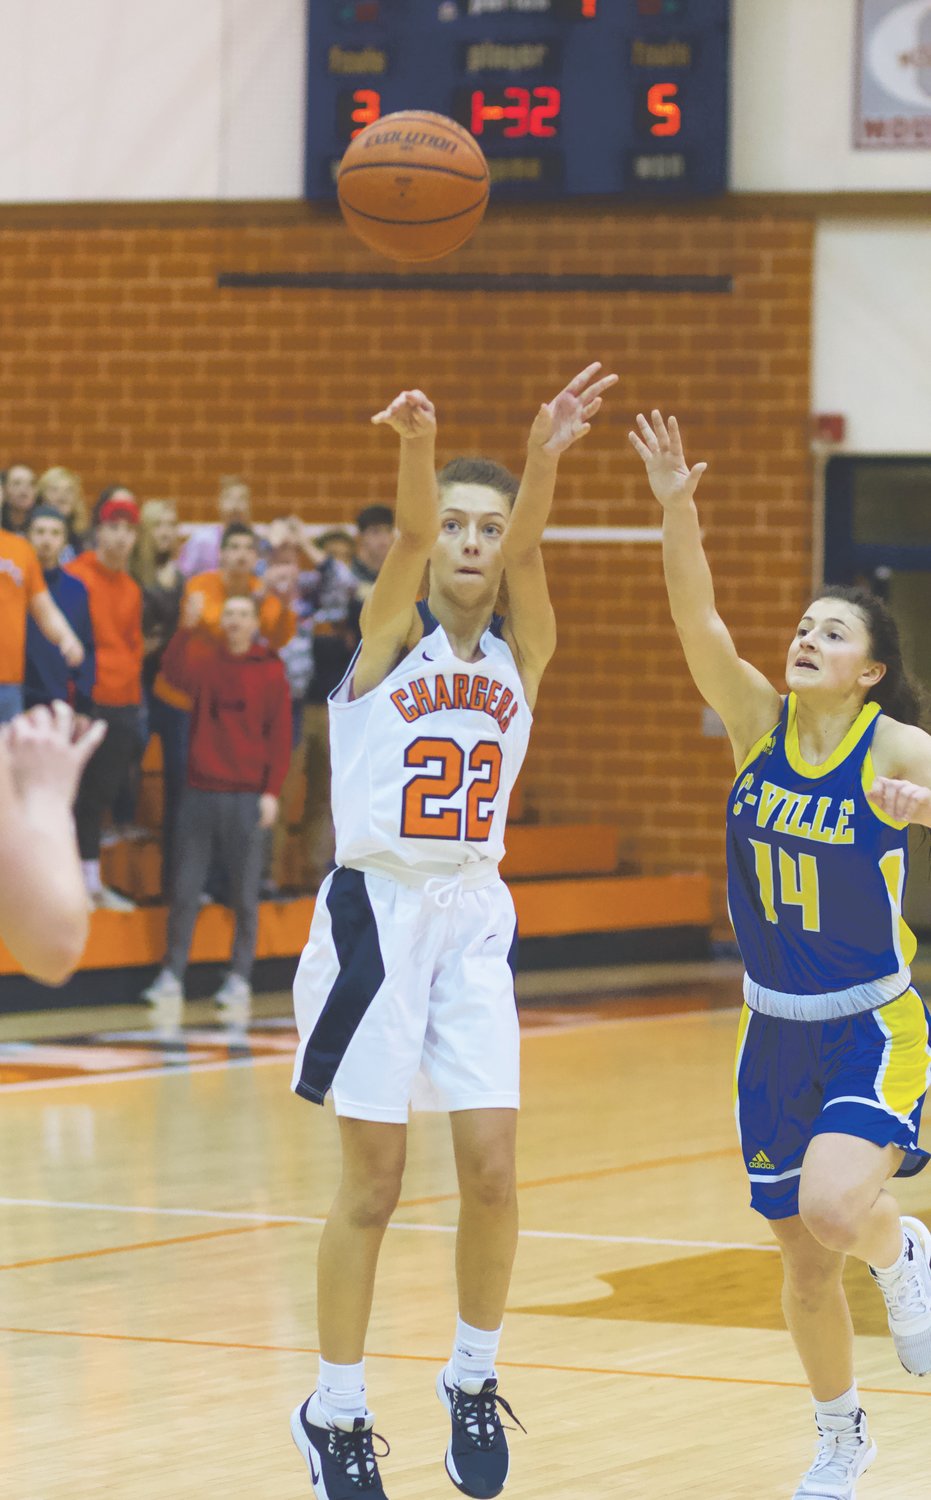 North Montgomery's Maddie Moseley led the Chargers past the Athenians in the consolation game with 13 points.